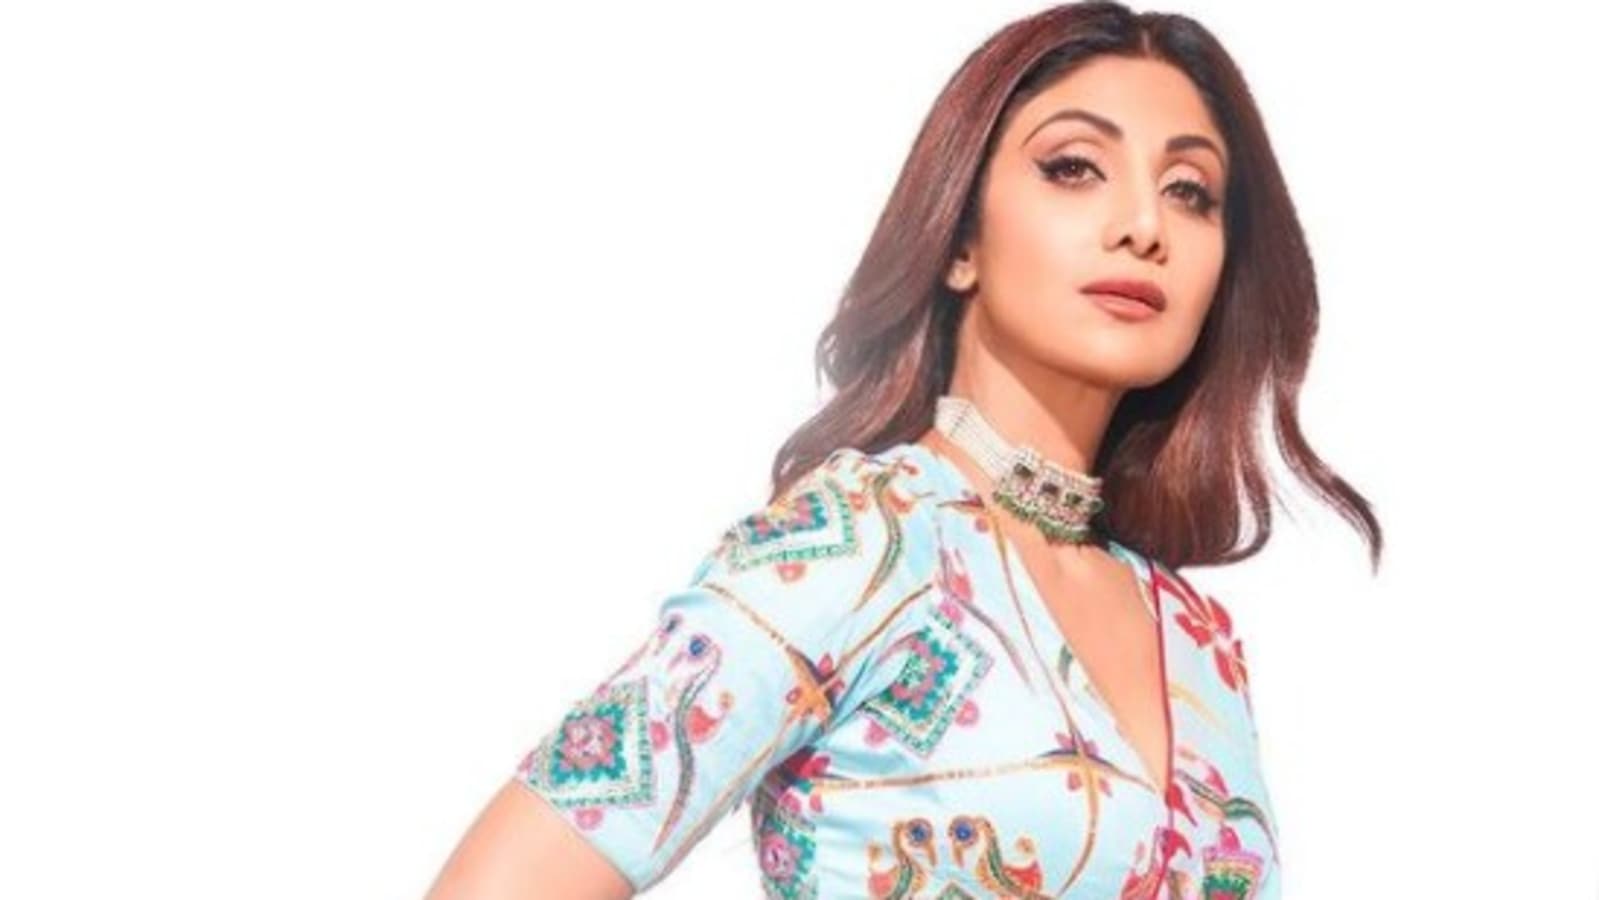 Shilpa Shetty Ki Bf Full Hd Bf - Shilpa Shetty shares pics from first photoshoot after Raj Kundra's arrest,  is 'determined to rise'. See here | Bollywood - Hindustan Times